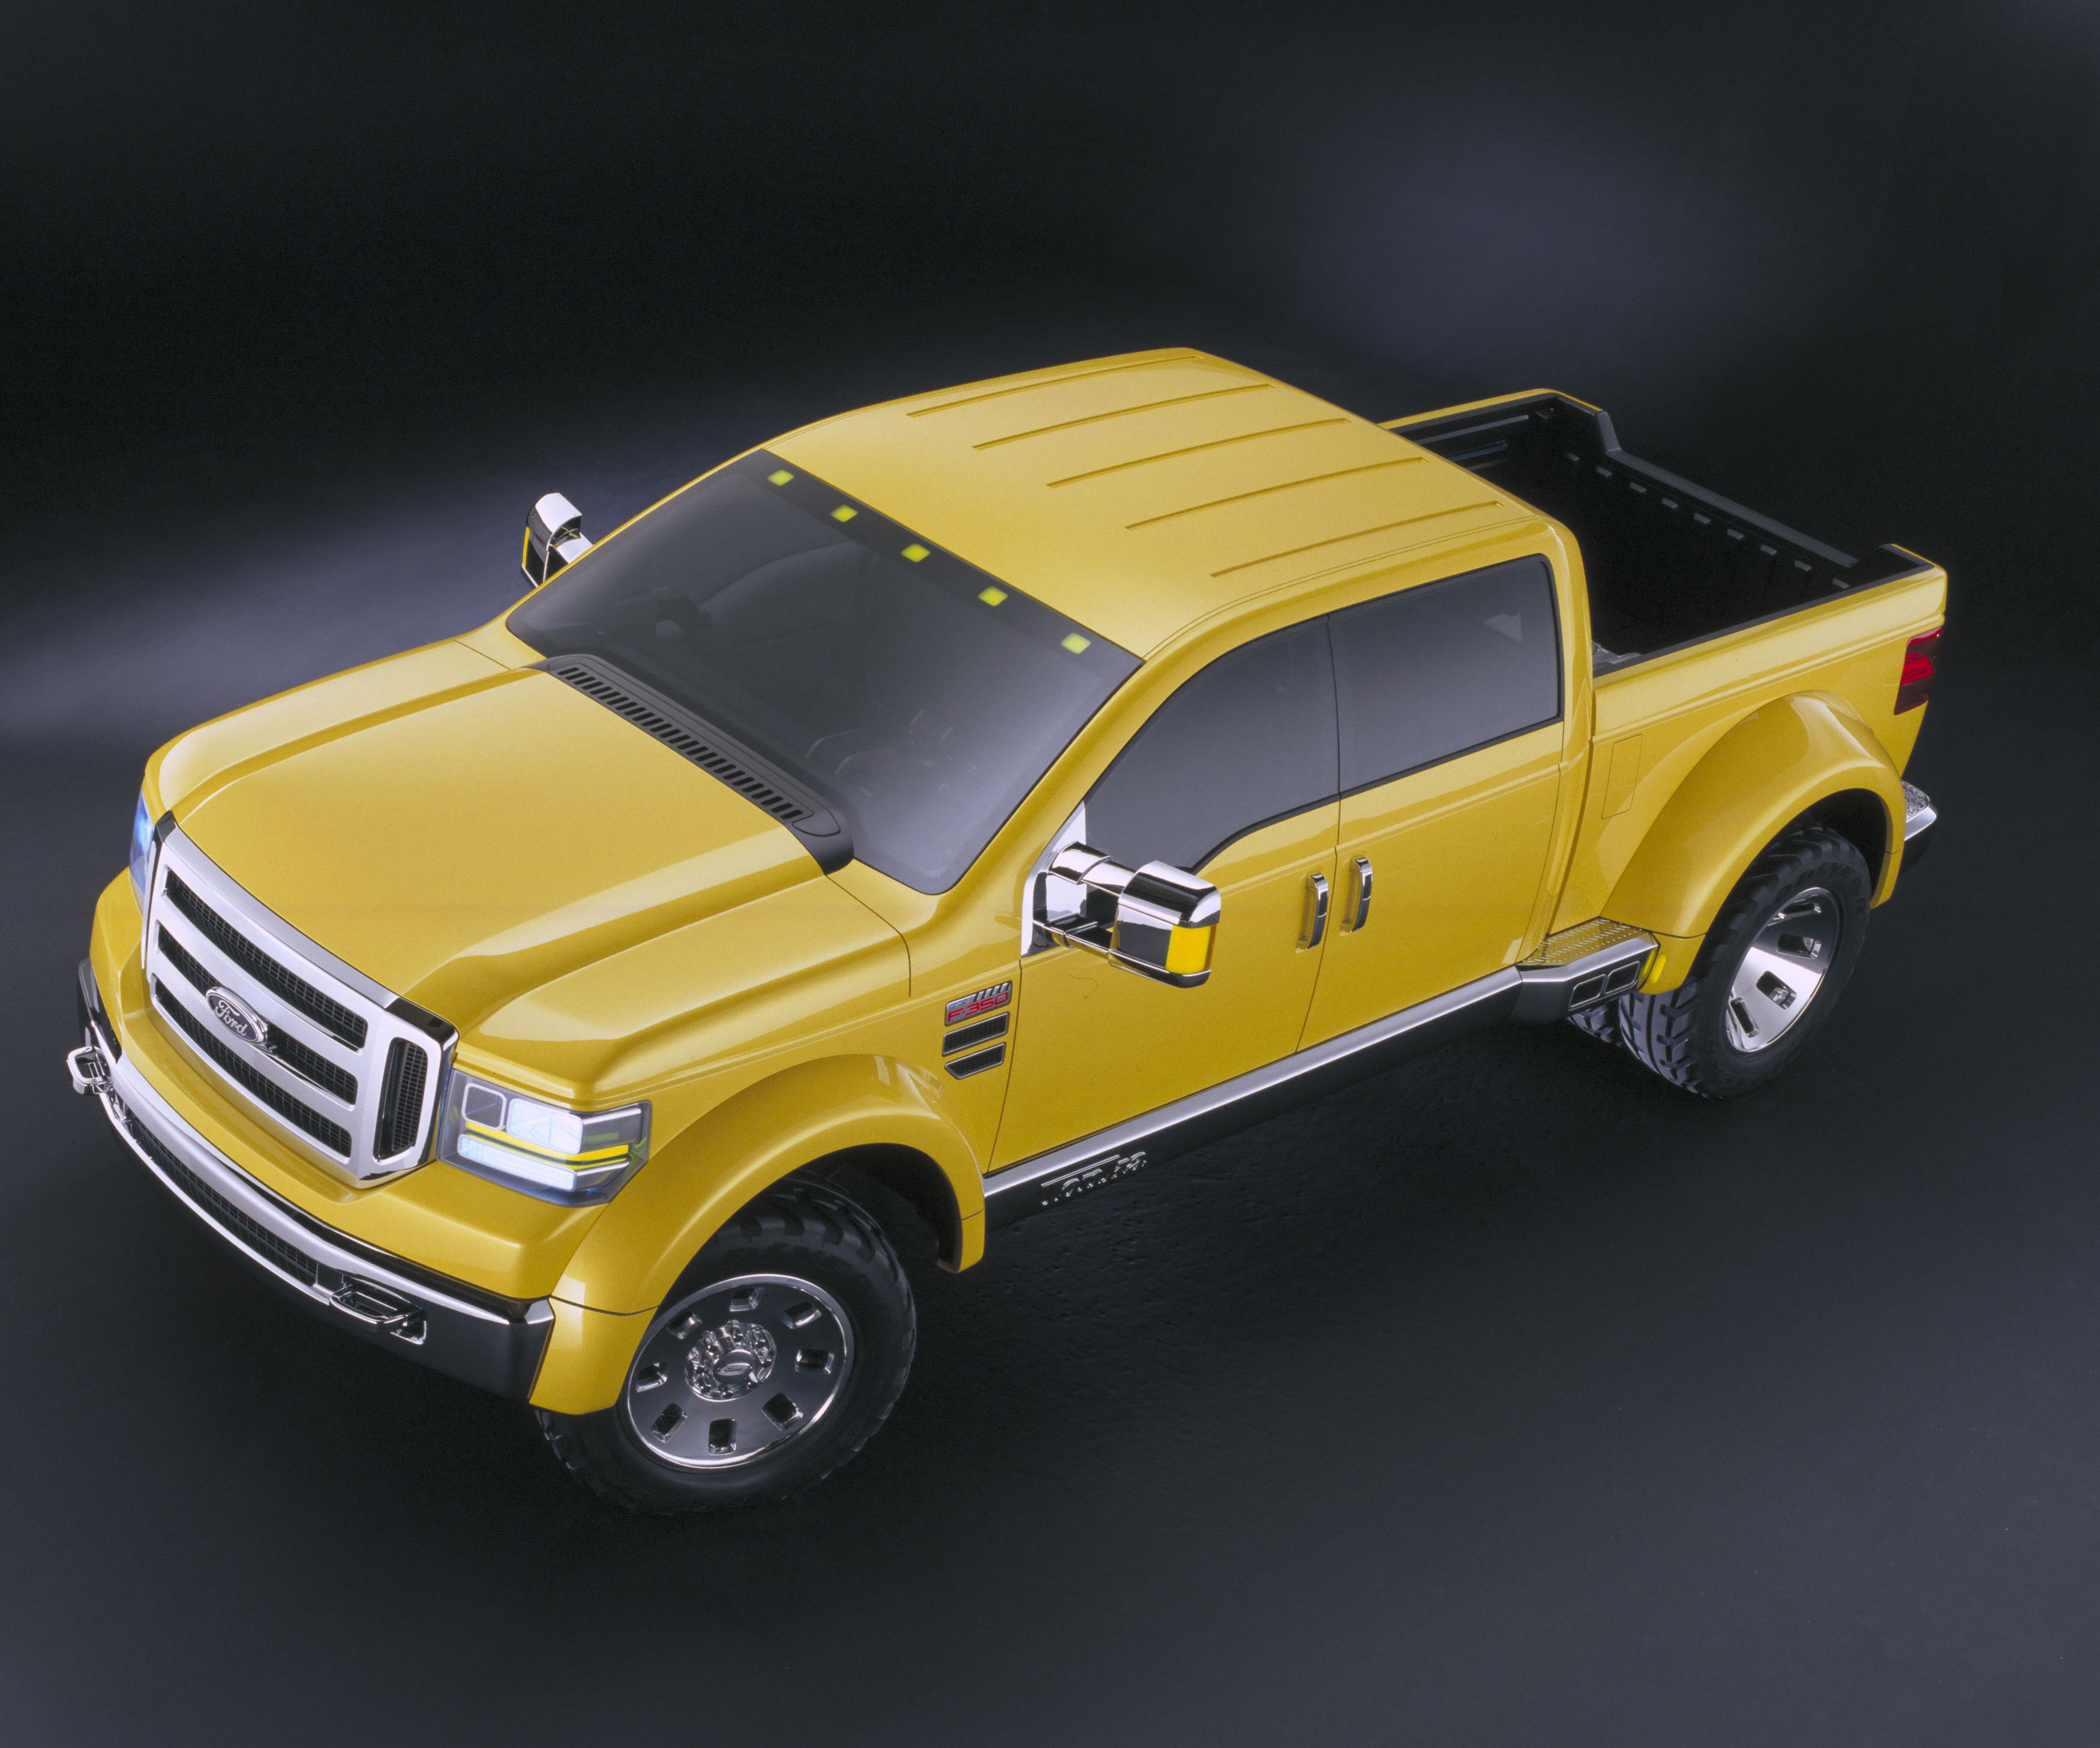 Ford Mighty F-350 Tonka Concept